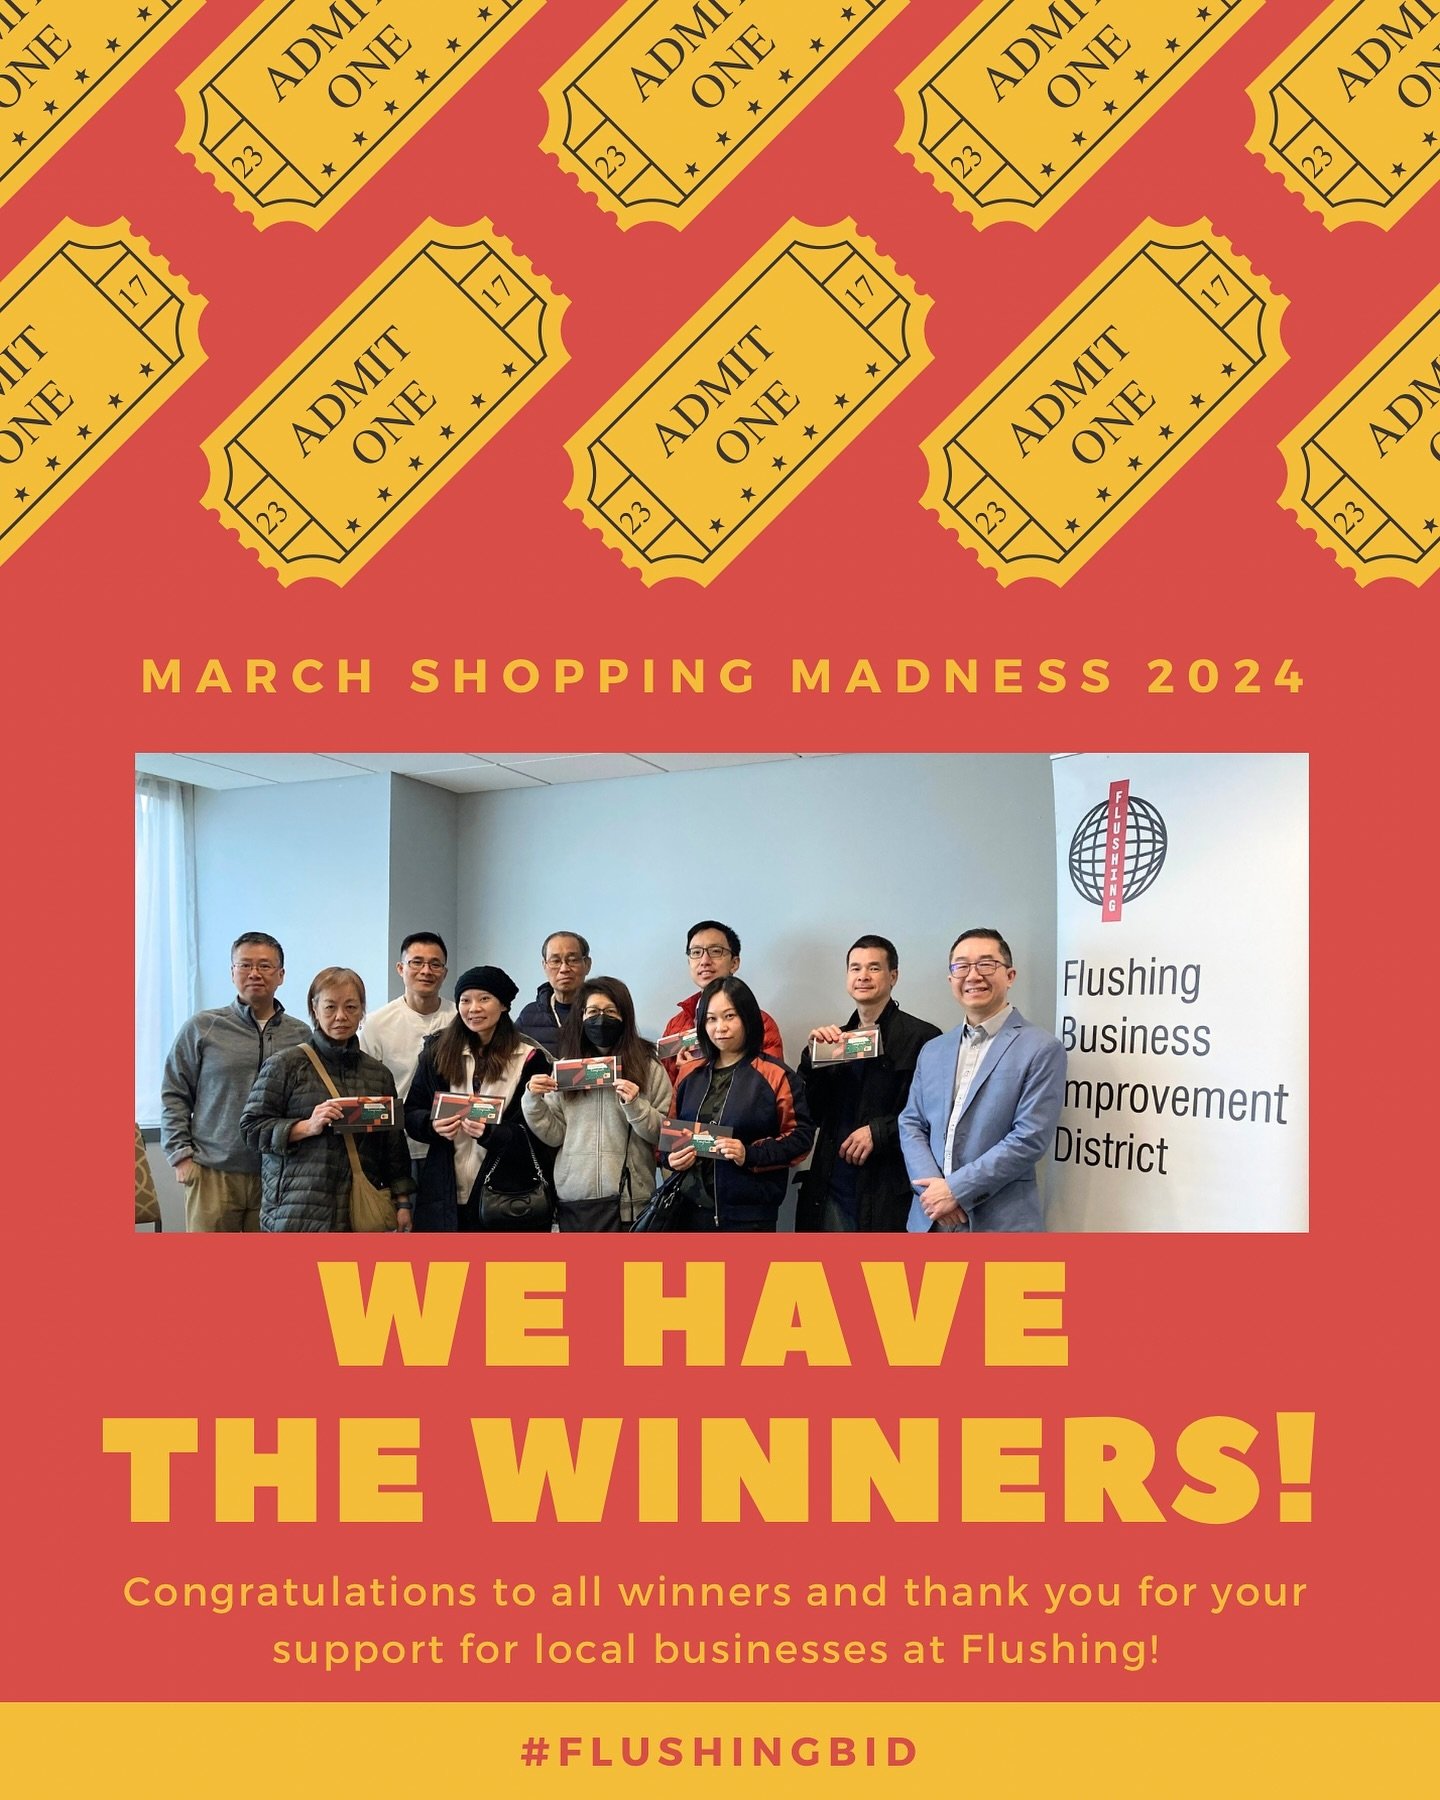 🎉🛍️ Winners Announcement: March Shopping Madness at Flushing! 🎉🛍️

We at Flushing BID are overjoyed to share the results of our 2024 March Shopping Madness event! Thank you to everyone who dove into the vibrant retail scene of Downtown Flushing t